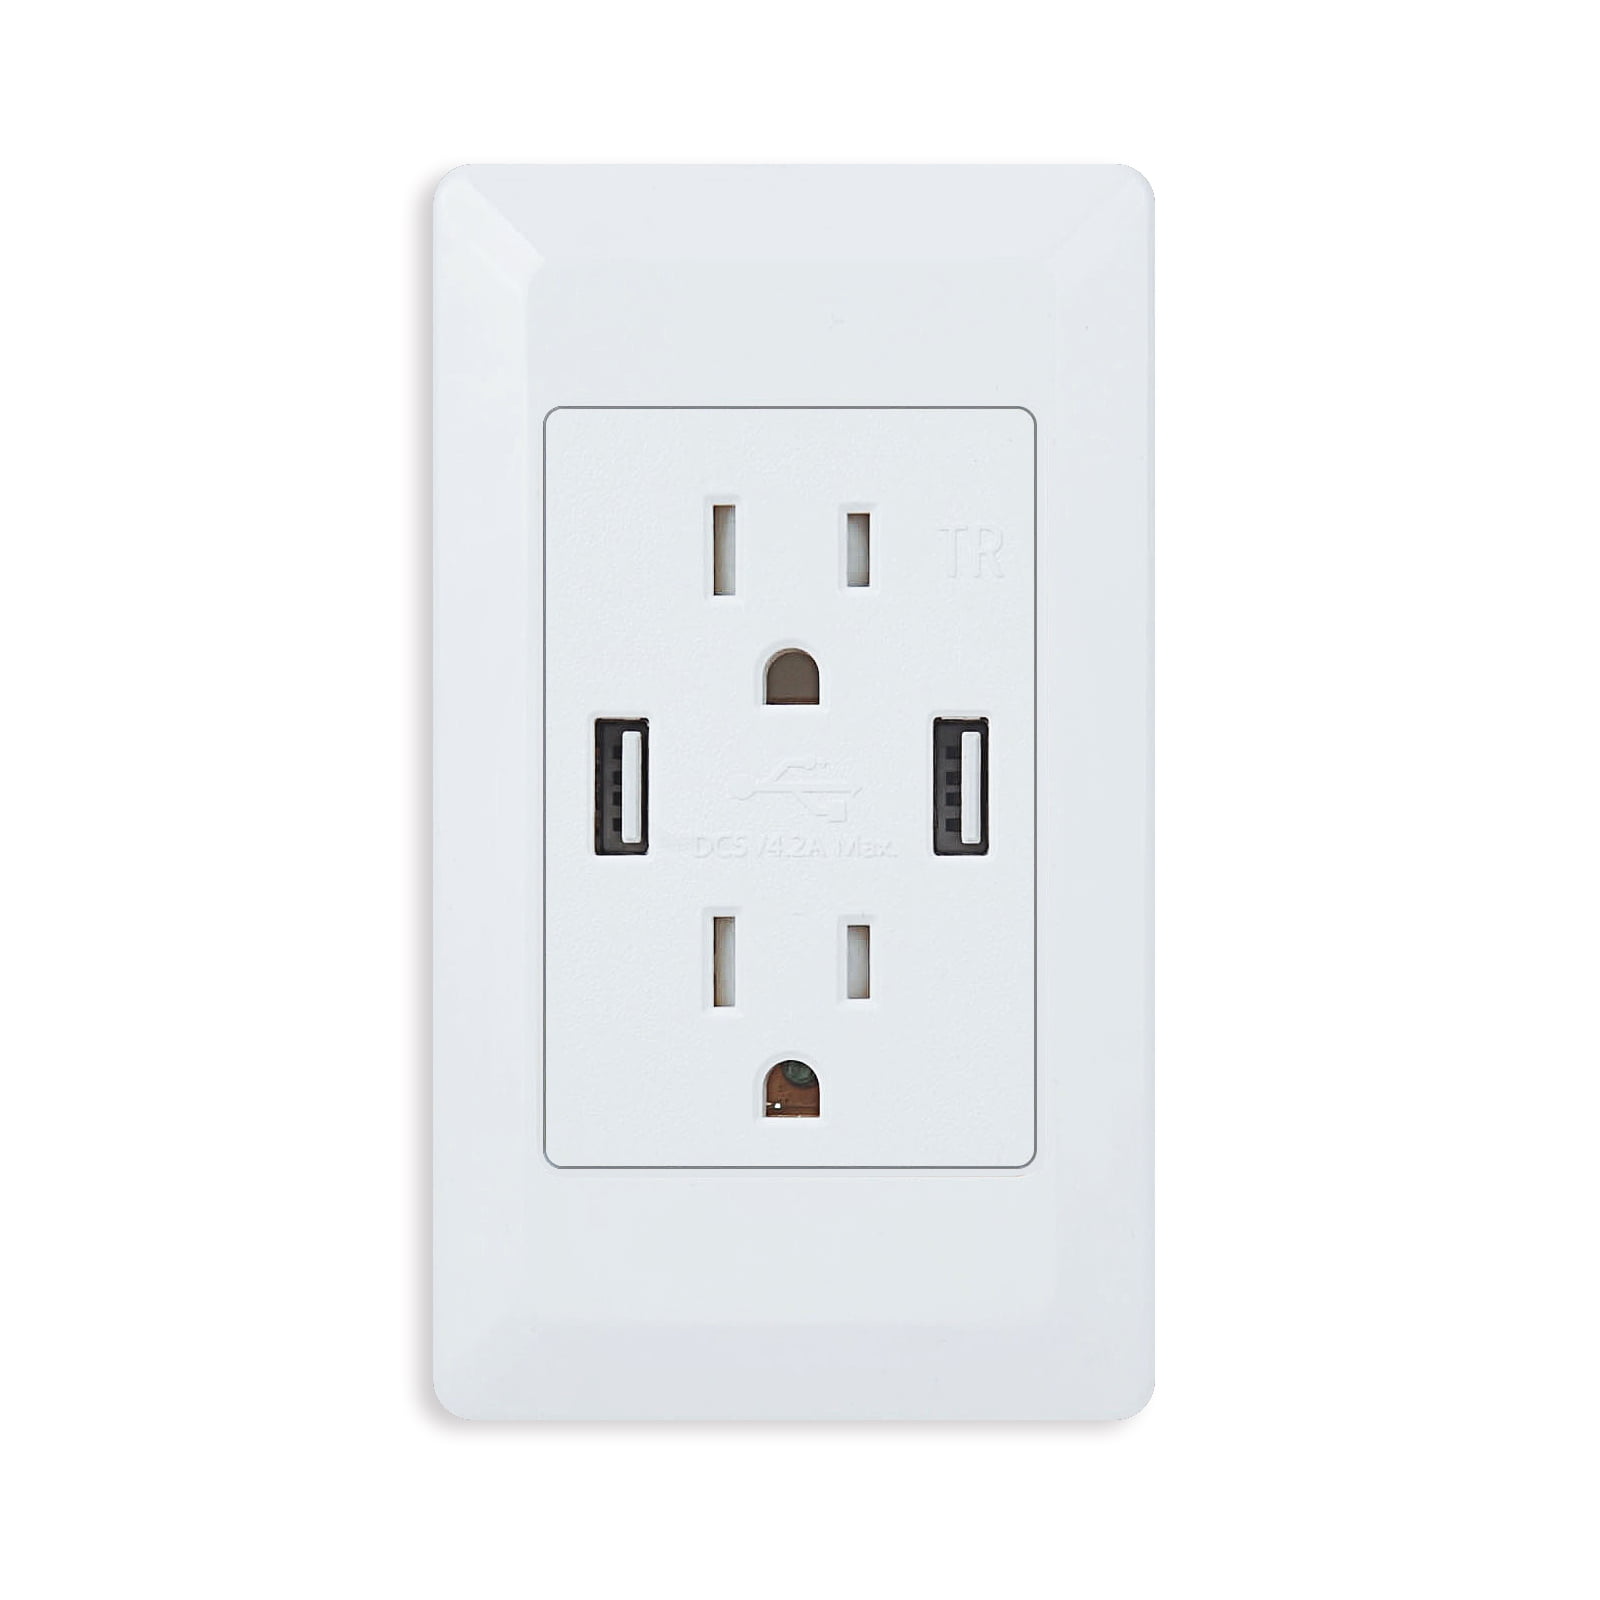 Double Wall Plug Socket 2 Gang 13A with 3 USB Charger Port Outlets White Plate